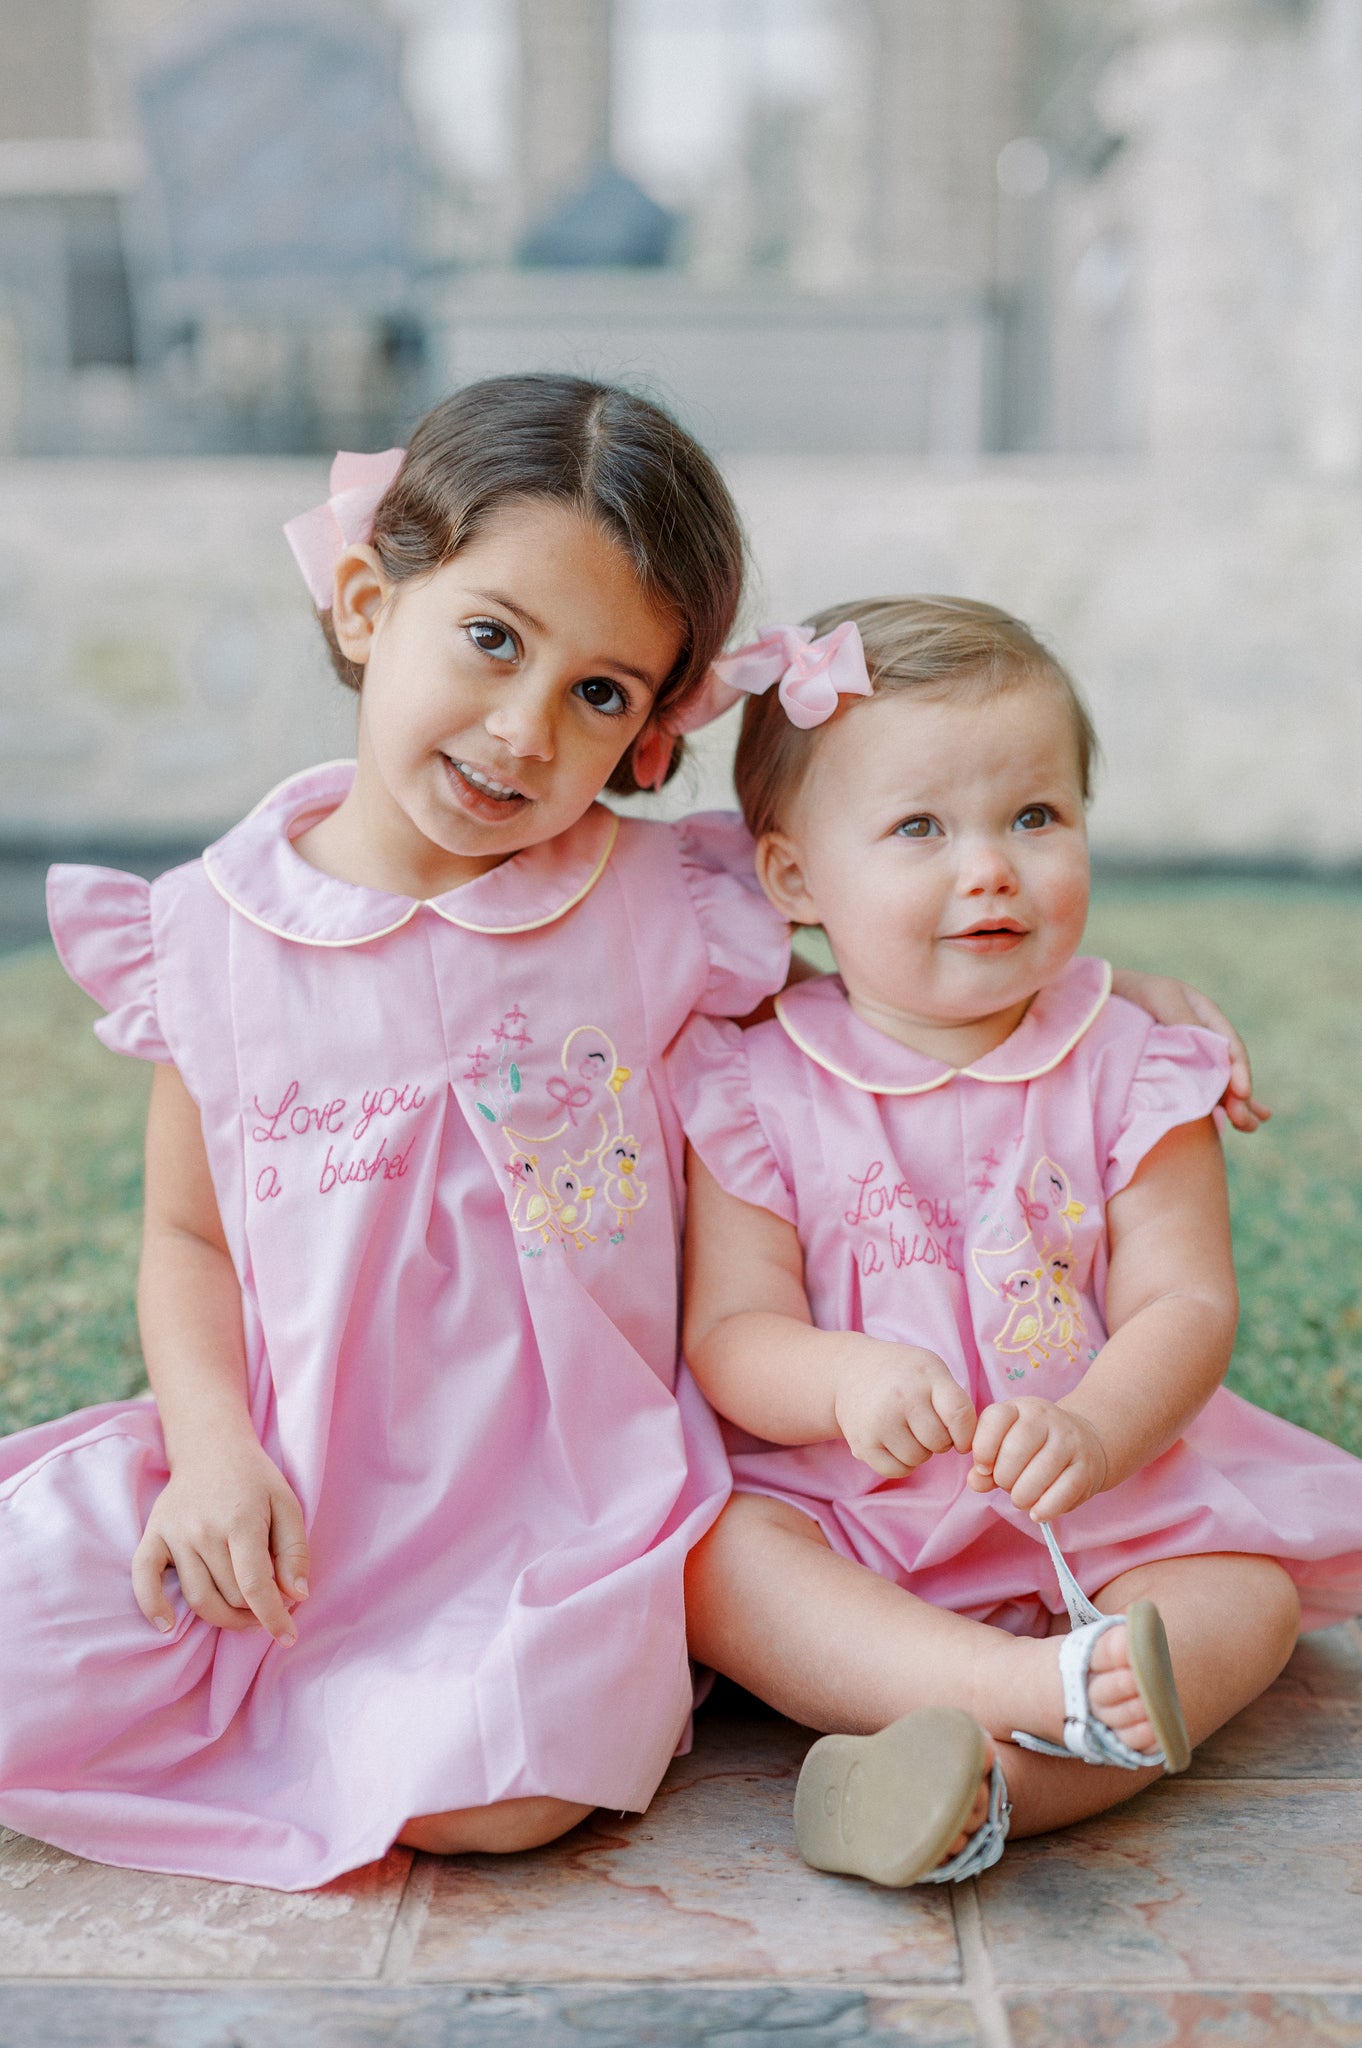 Brother and Sissy – Brother and Sissy Children's Boutique